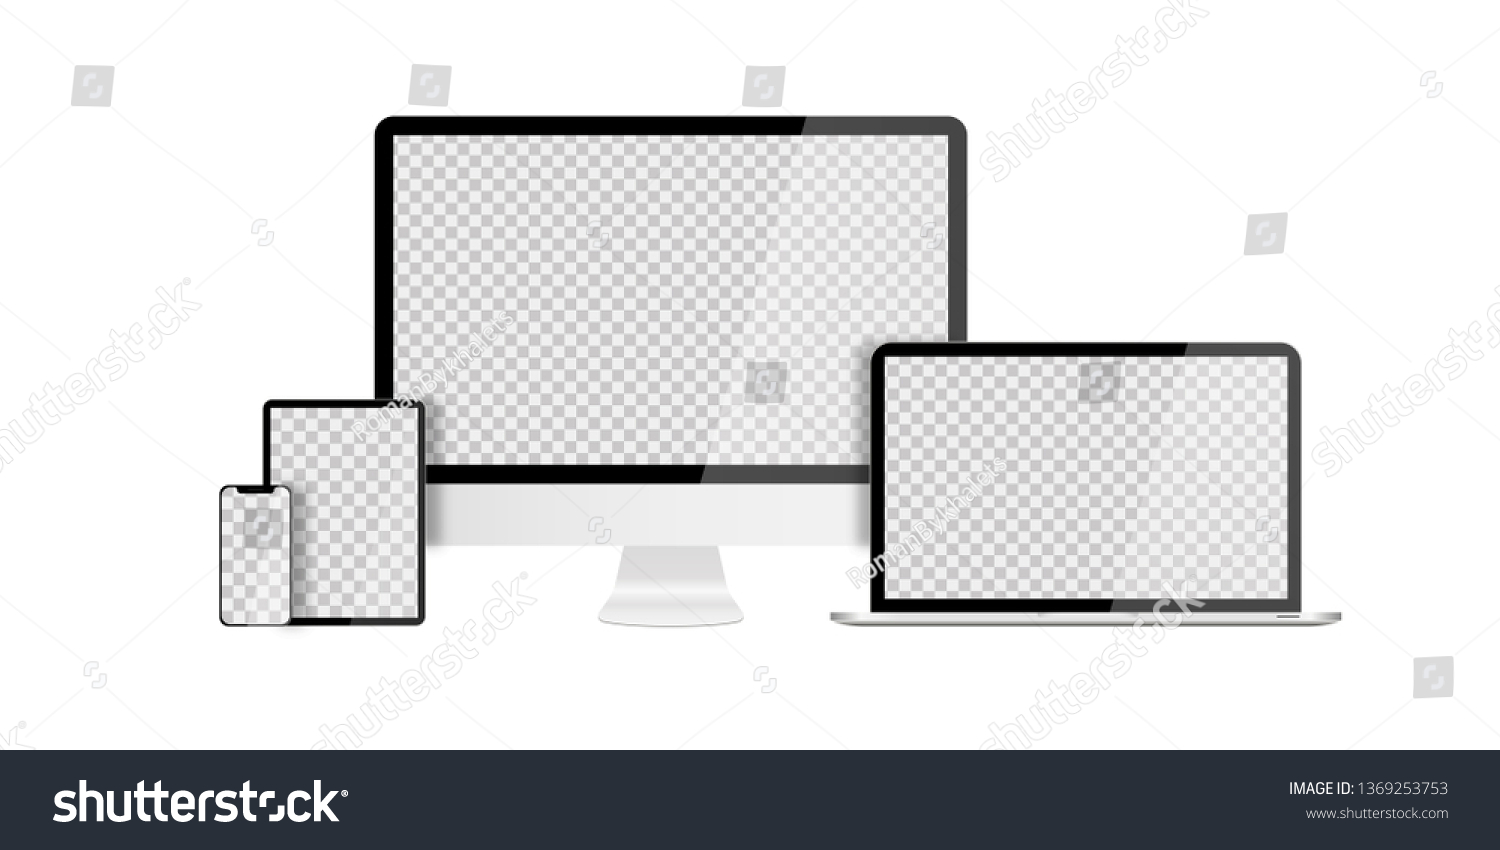 Set of devices on white background. Computer laptop tablet and smartphone with empty screens. Mock up. EPS 10